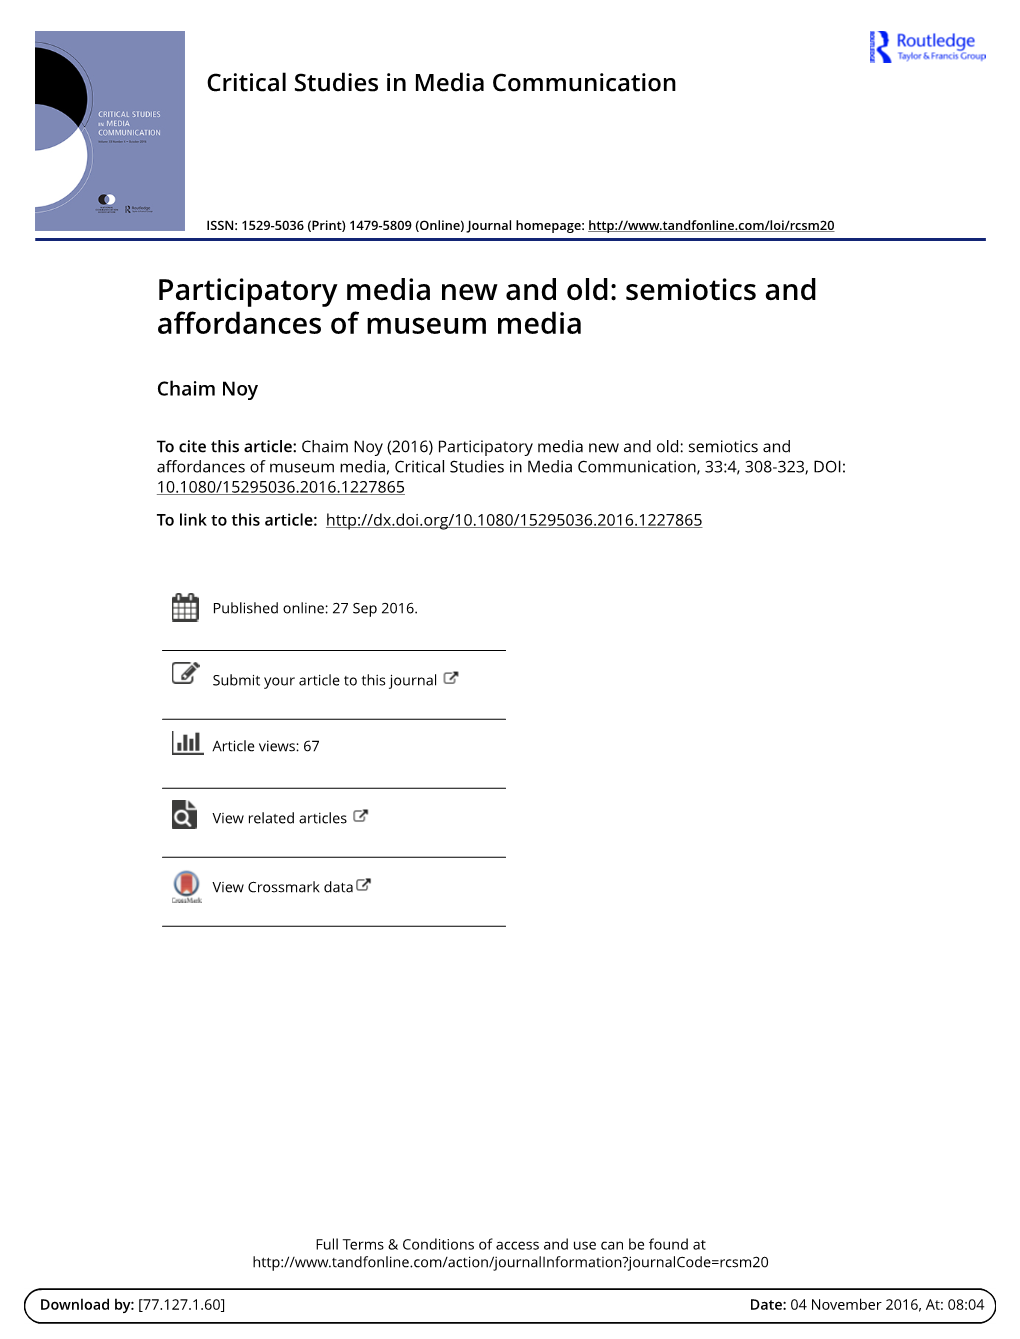 Participatory Media New and Old: Semiotics and Affordances of Museum Media